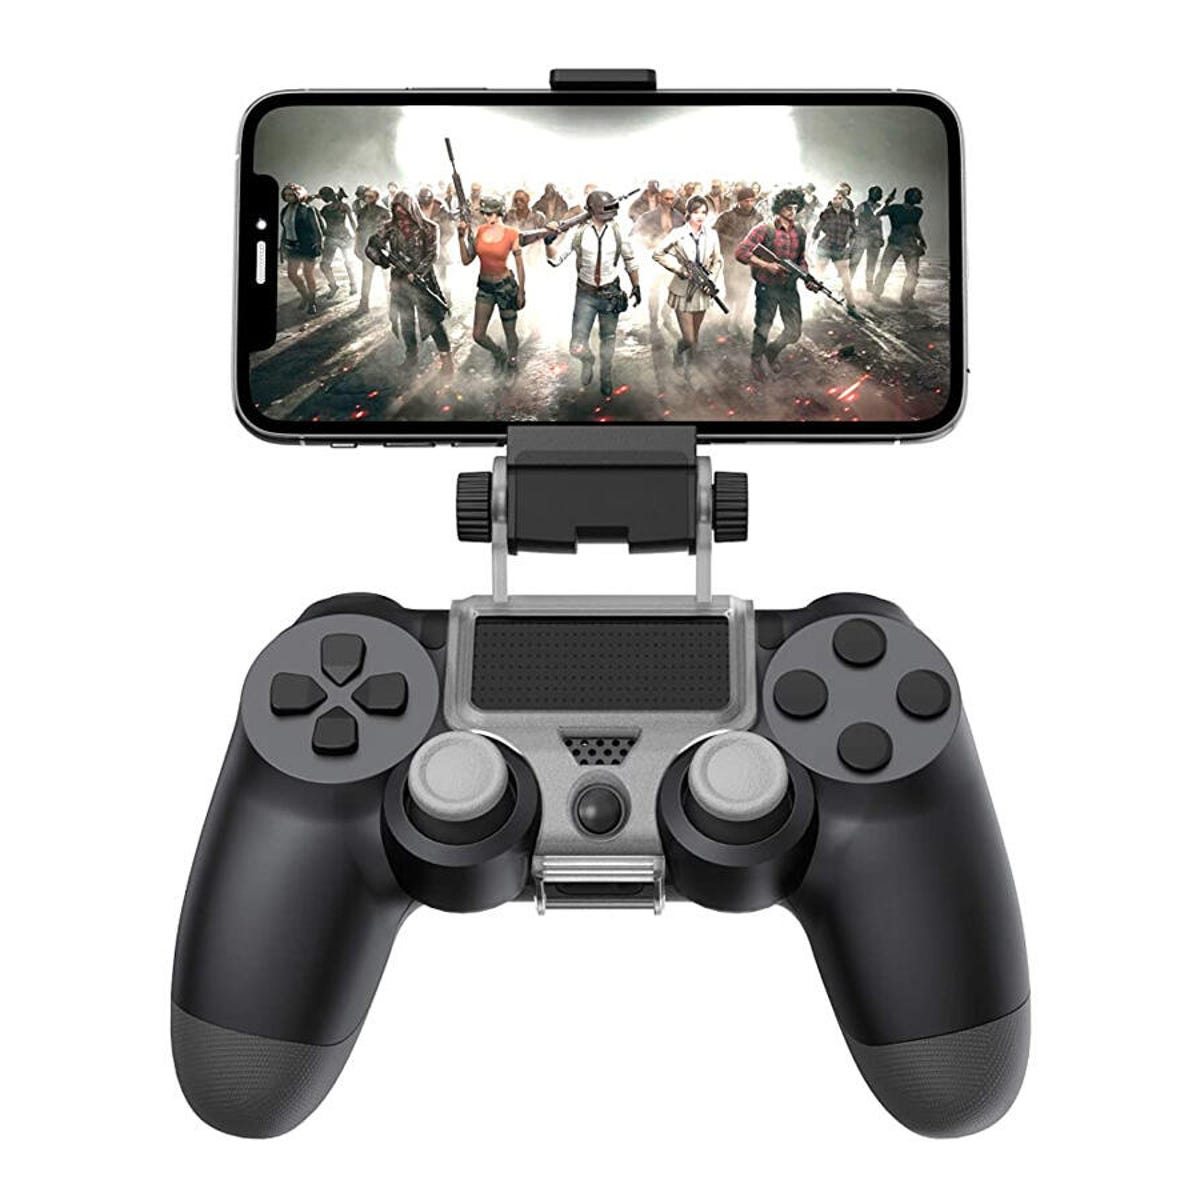 lejlighed mus Egenskab How to connect a PlayStation 4 controller to your iPhone | ZDNET